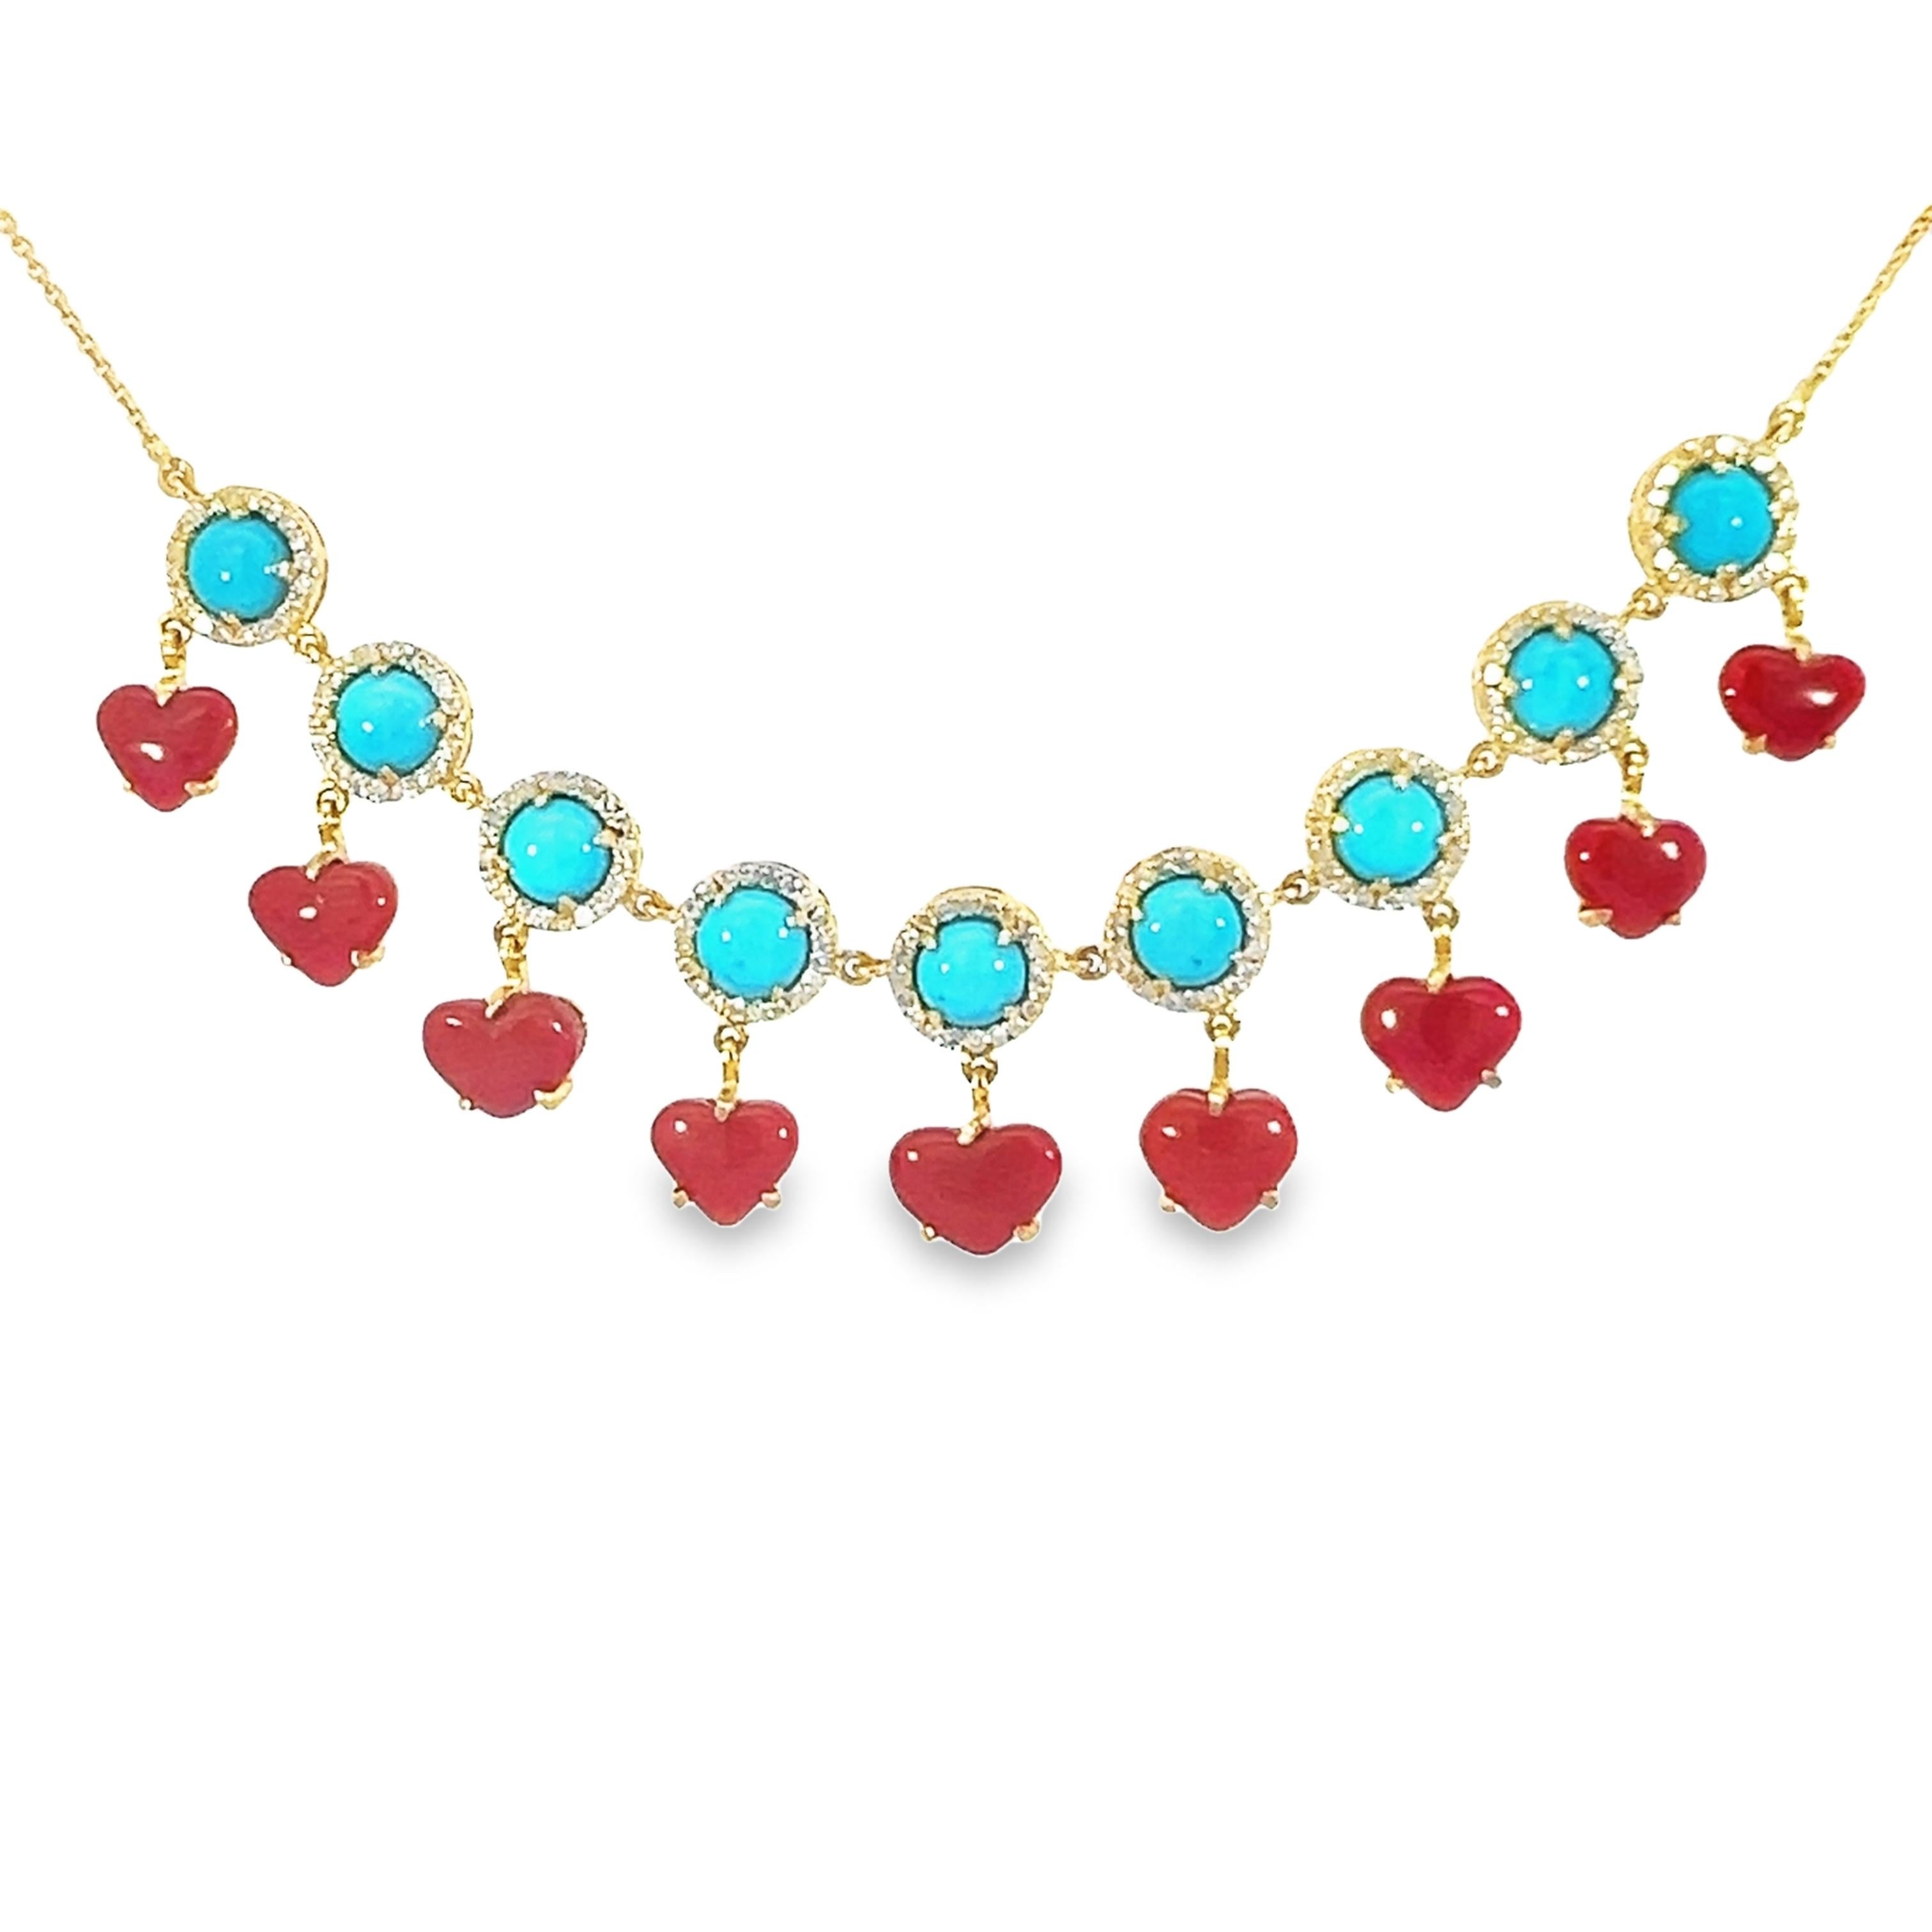 A magnificent 9.66-carat natural coral and 4.21-carat turquoise necklace set in 18-karat yellow gold with 0.75-carat diamonds. The necklace is featured with coral hearts. round turquoise gems and  that are surrounded with diamonds. The necklace is